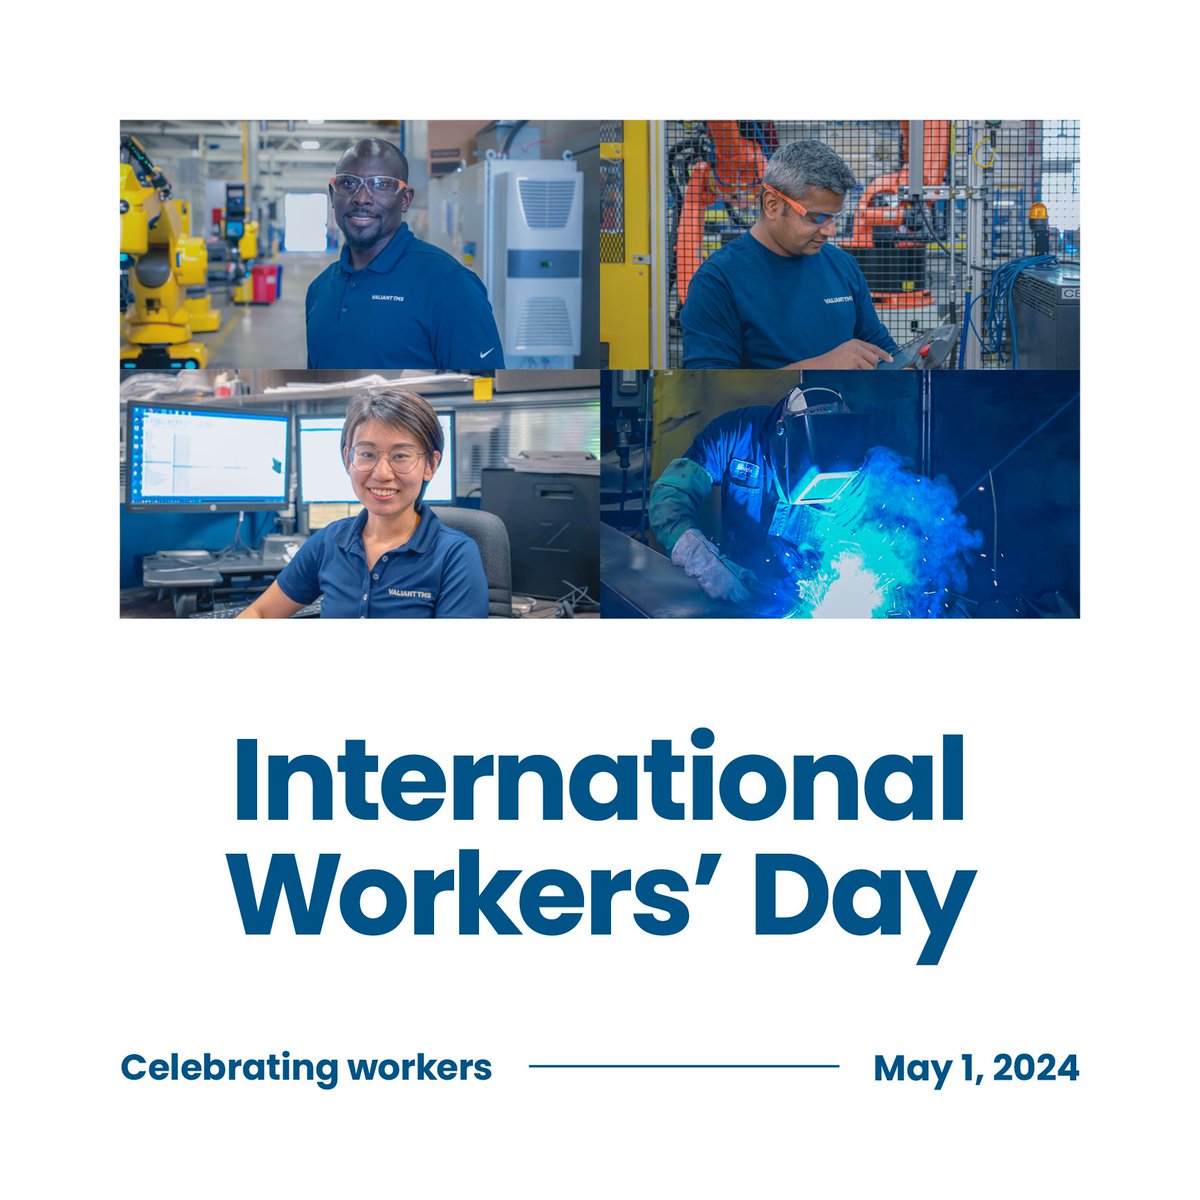 On International Workers’ Day, we honour the hard work, achievements, and resilience of workers around the world. #InternationalWorkersDay #MayDay